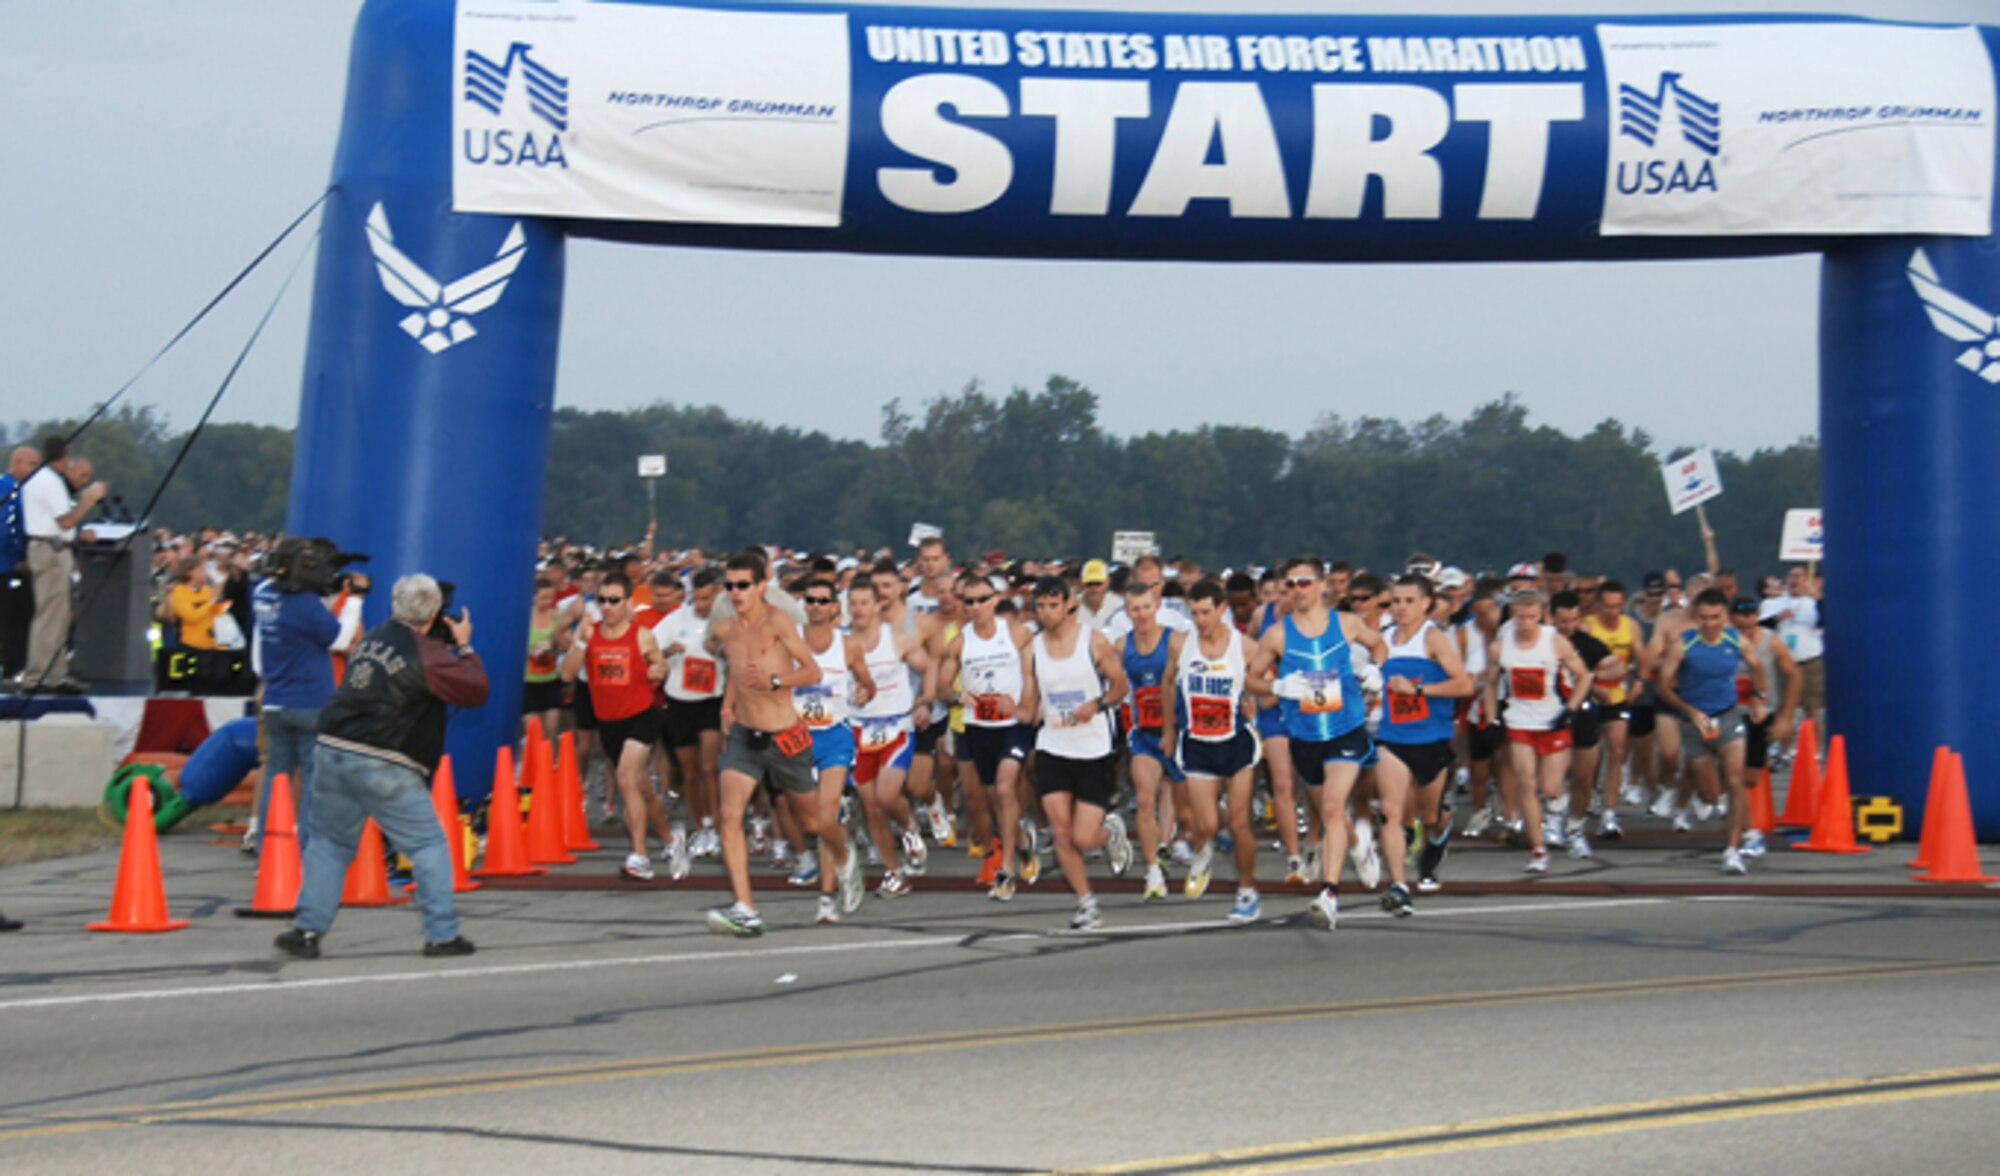 The Air Force Marathon is still in need of volunteers to assist with the upcoming race, the desired number of volunteers is 2,300. Volunteer registration closes Aug. 31. Volunteers can view a list of open positions and register at www.usafmarathon.com. (U.S. Air Force photo/Ben Strasser)